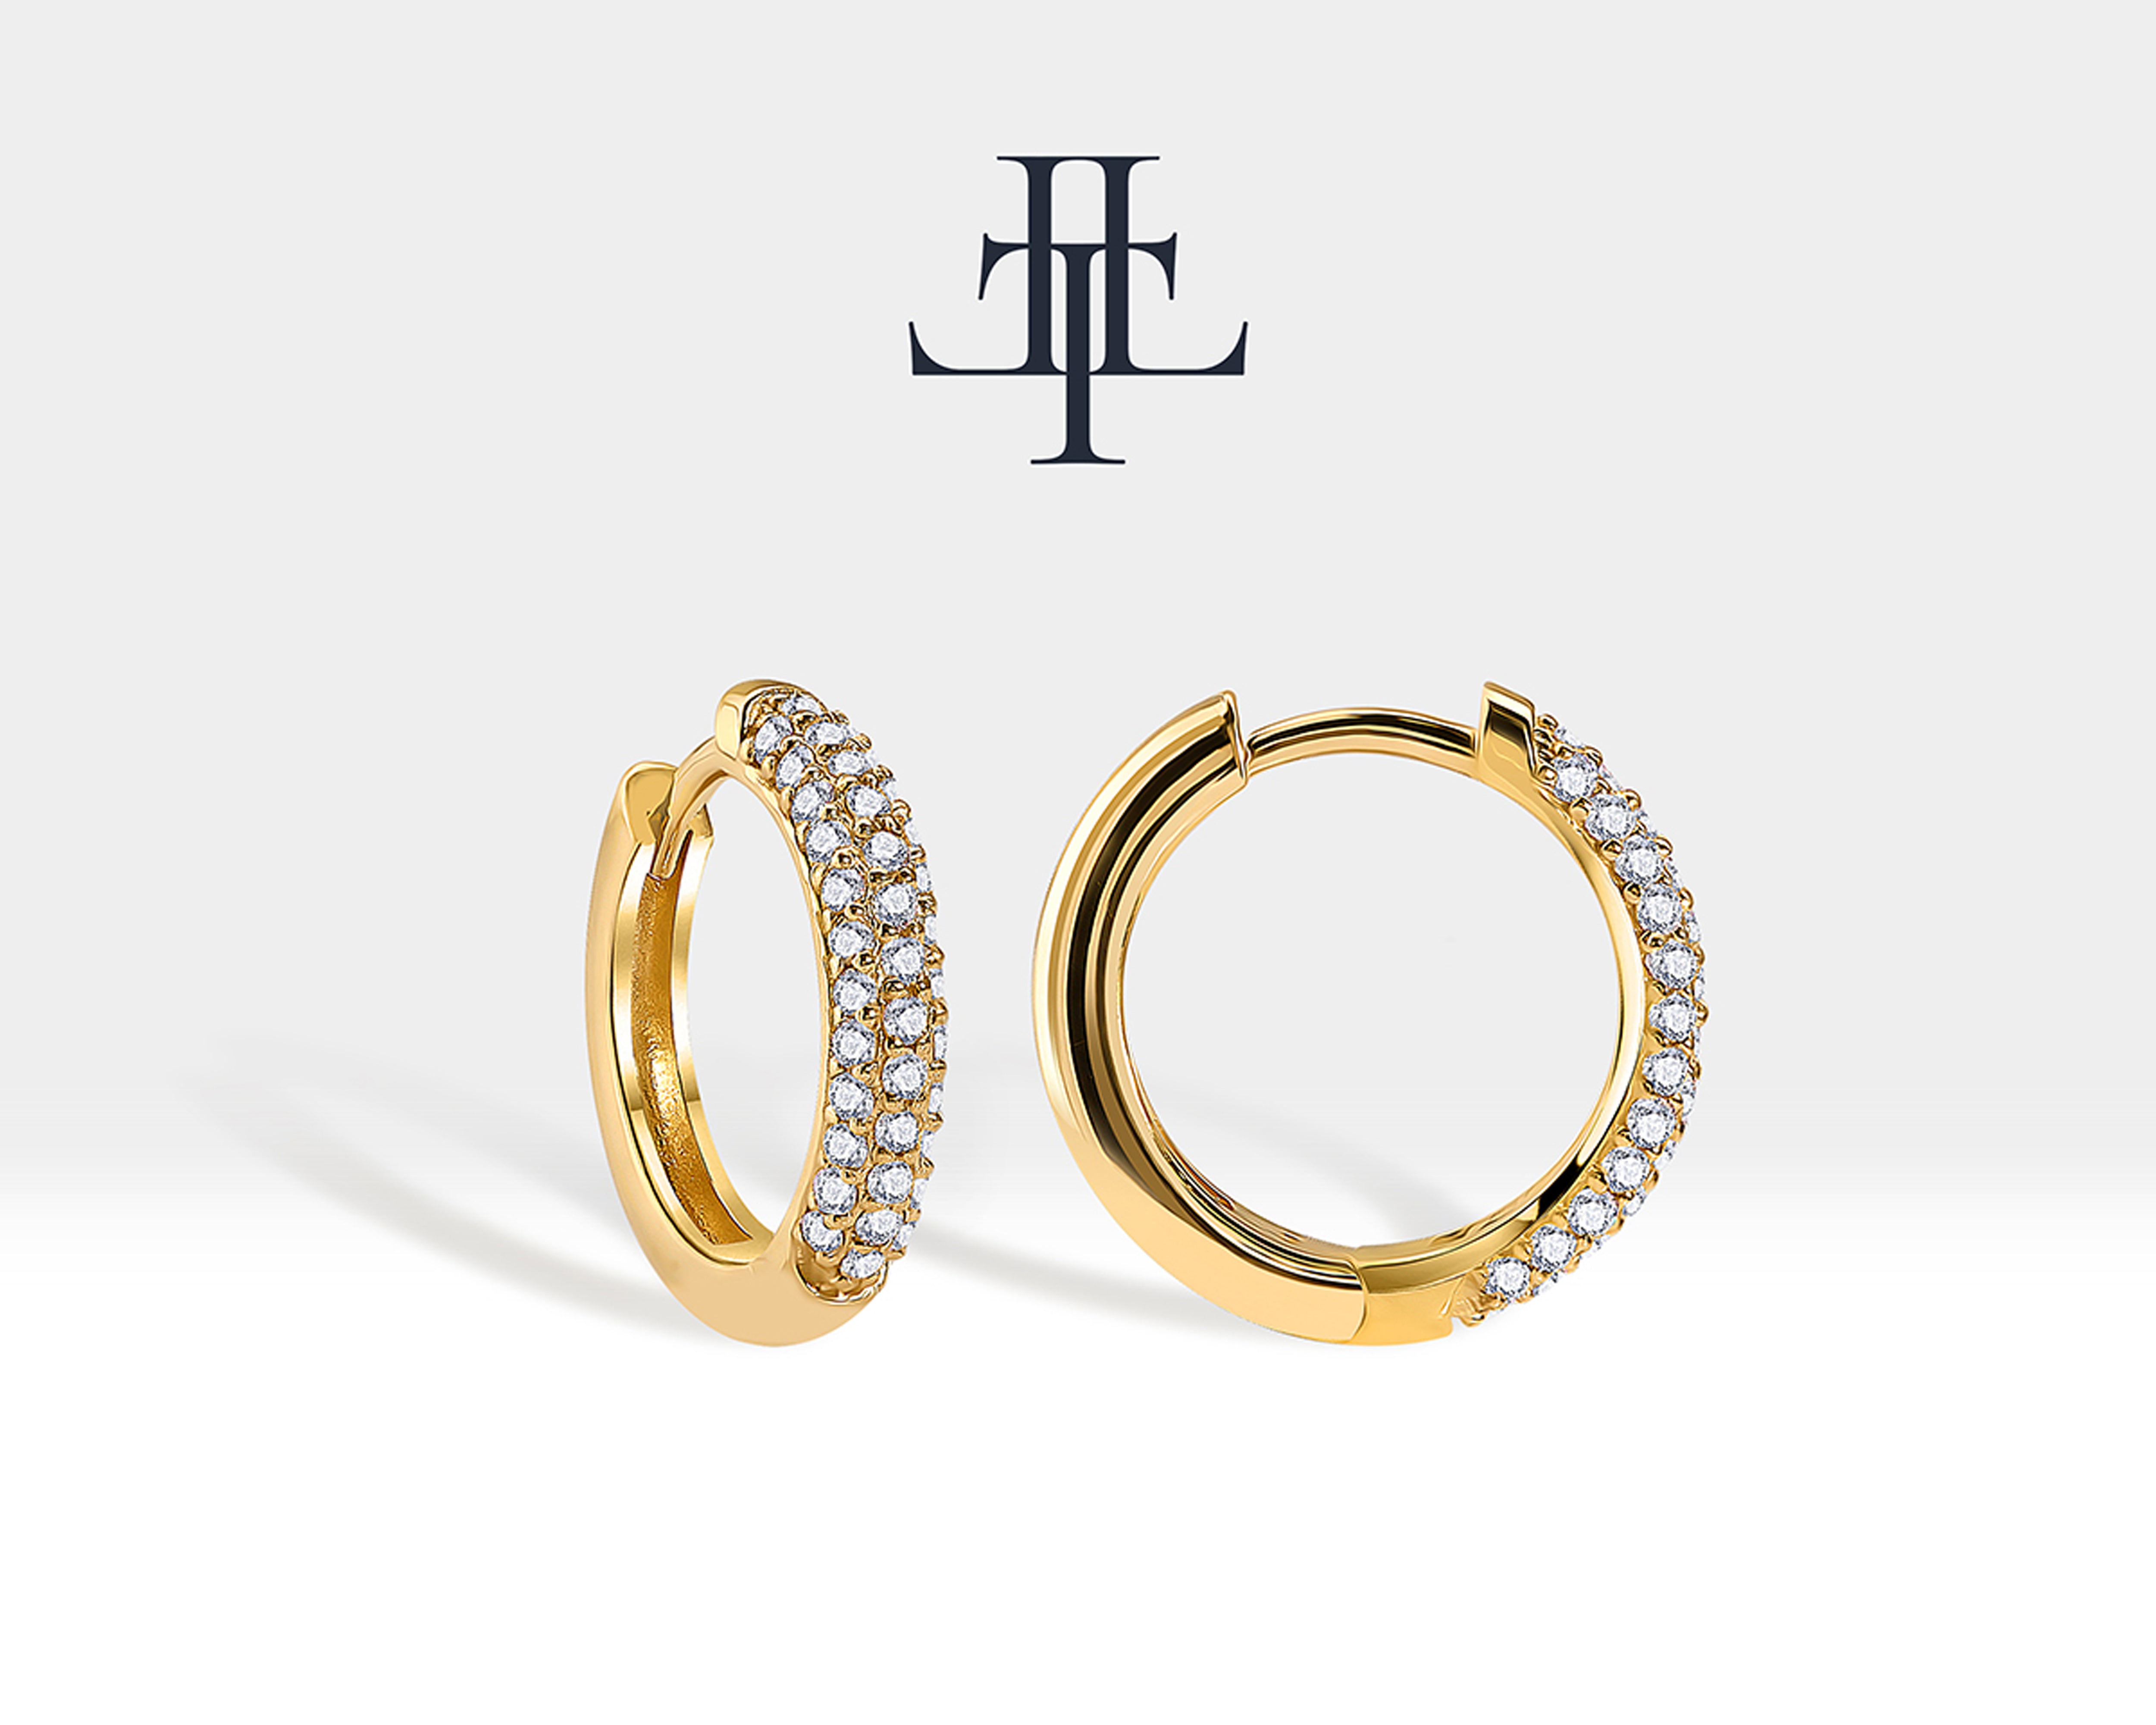 Make a Statement with These 5 Different Hoop Earrings